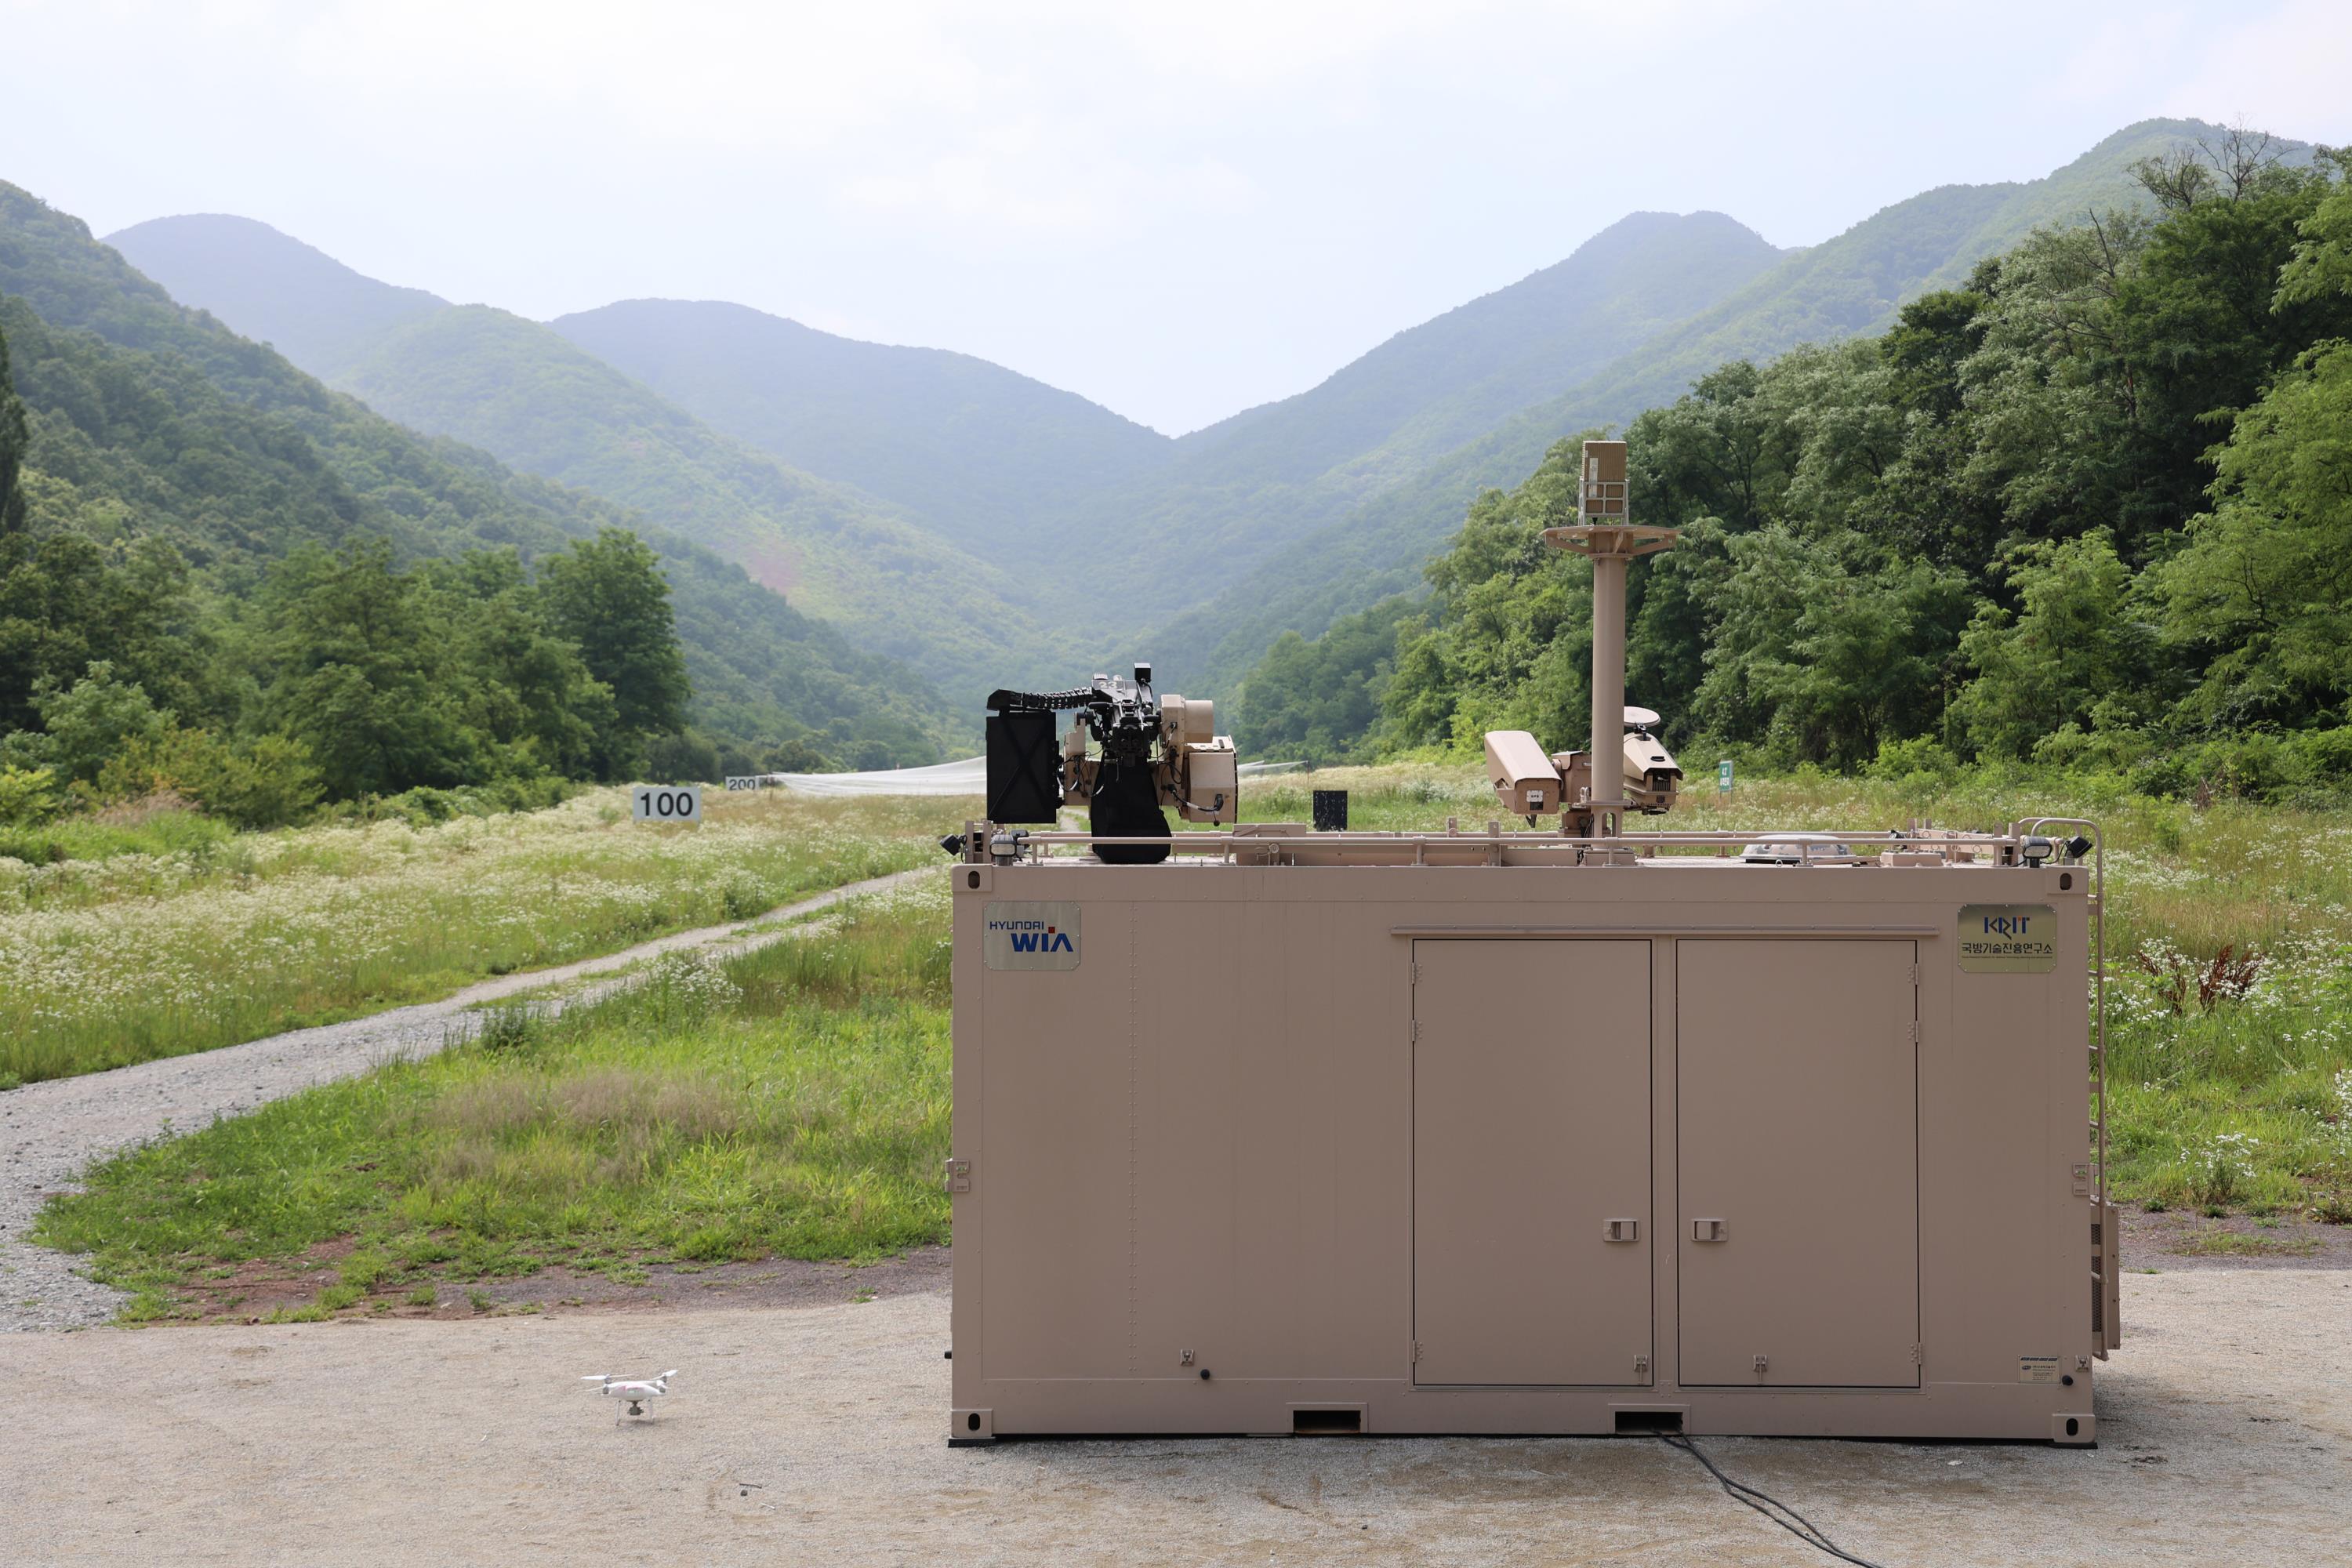 <FIgure> On July 5th, HYUNDAI WIA conducted the ADS hard kill firing test, which was held at the firing range in Chungcheonbuk-do. The picture was provided  by HYUNDAI WIA.